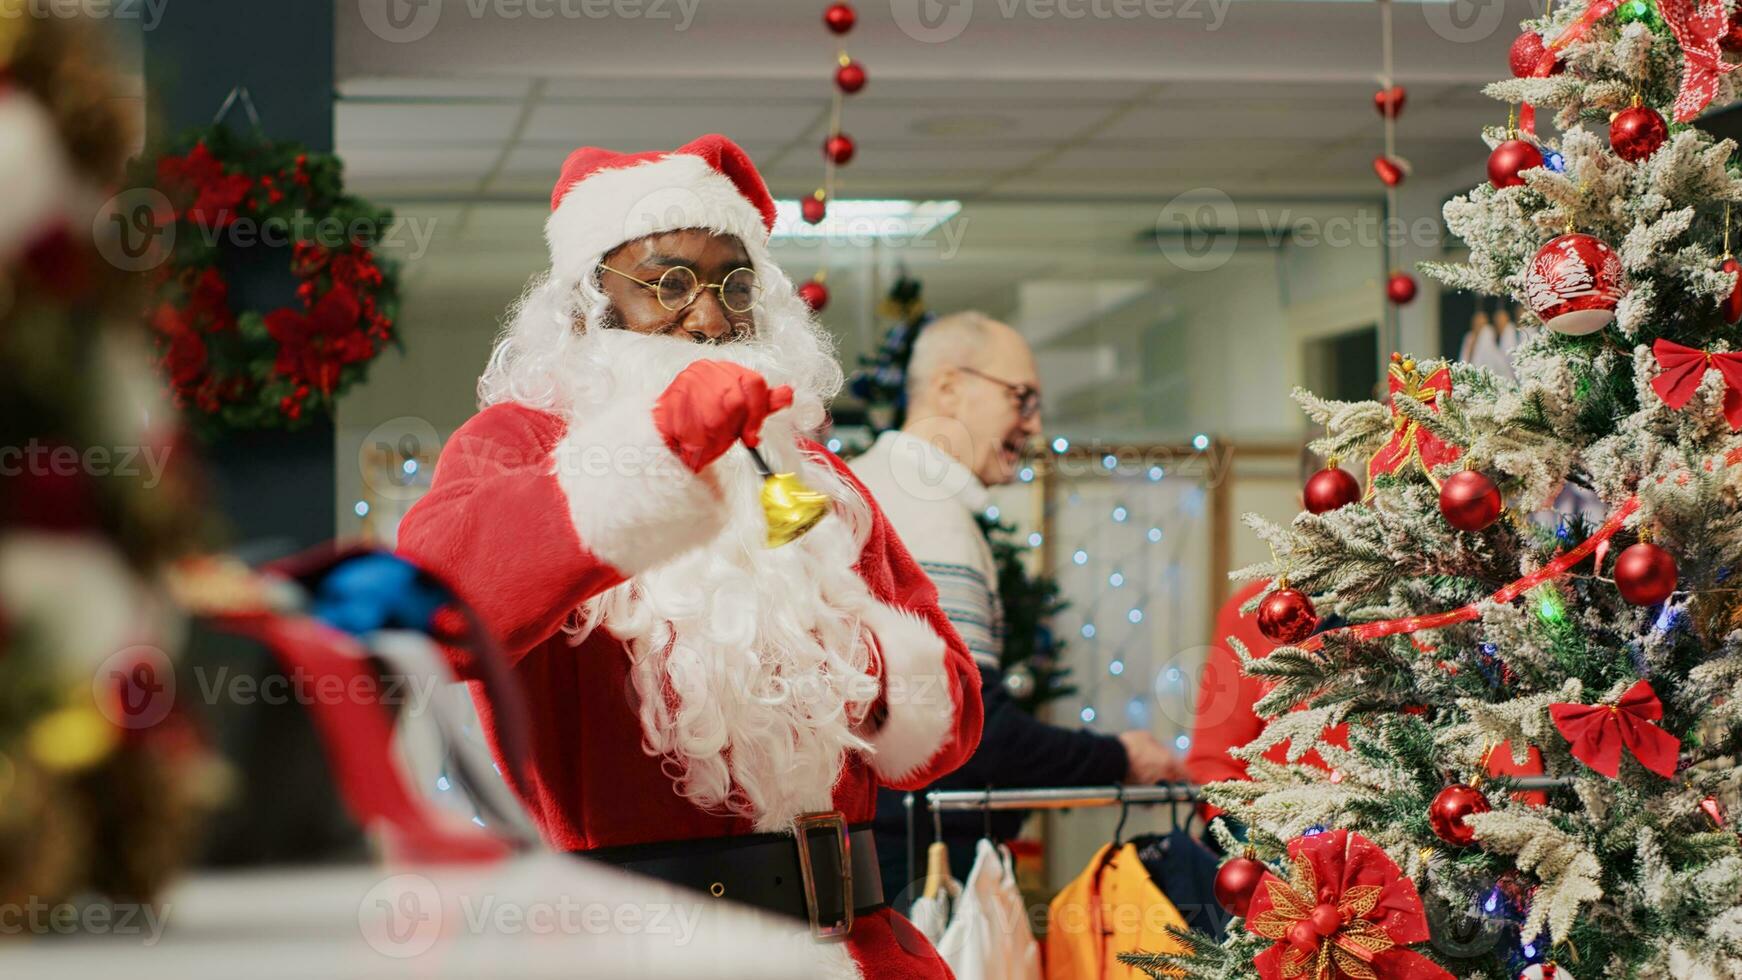 Employee acting as Santa Claus entertaining shoppers in Christmas decorated fashion store during winter holiday season. Worker instilling festive spirit in clients visiting clothing shop photo